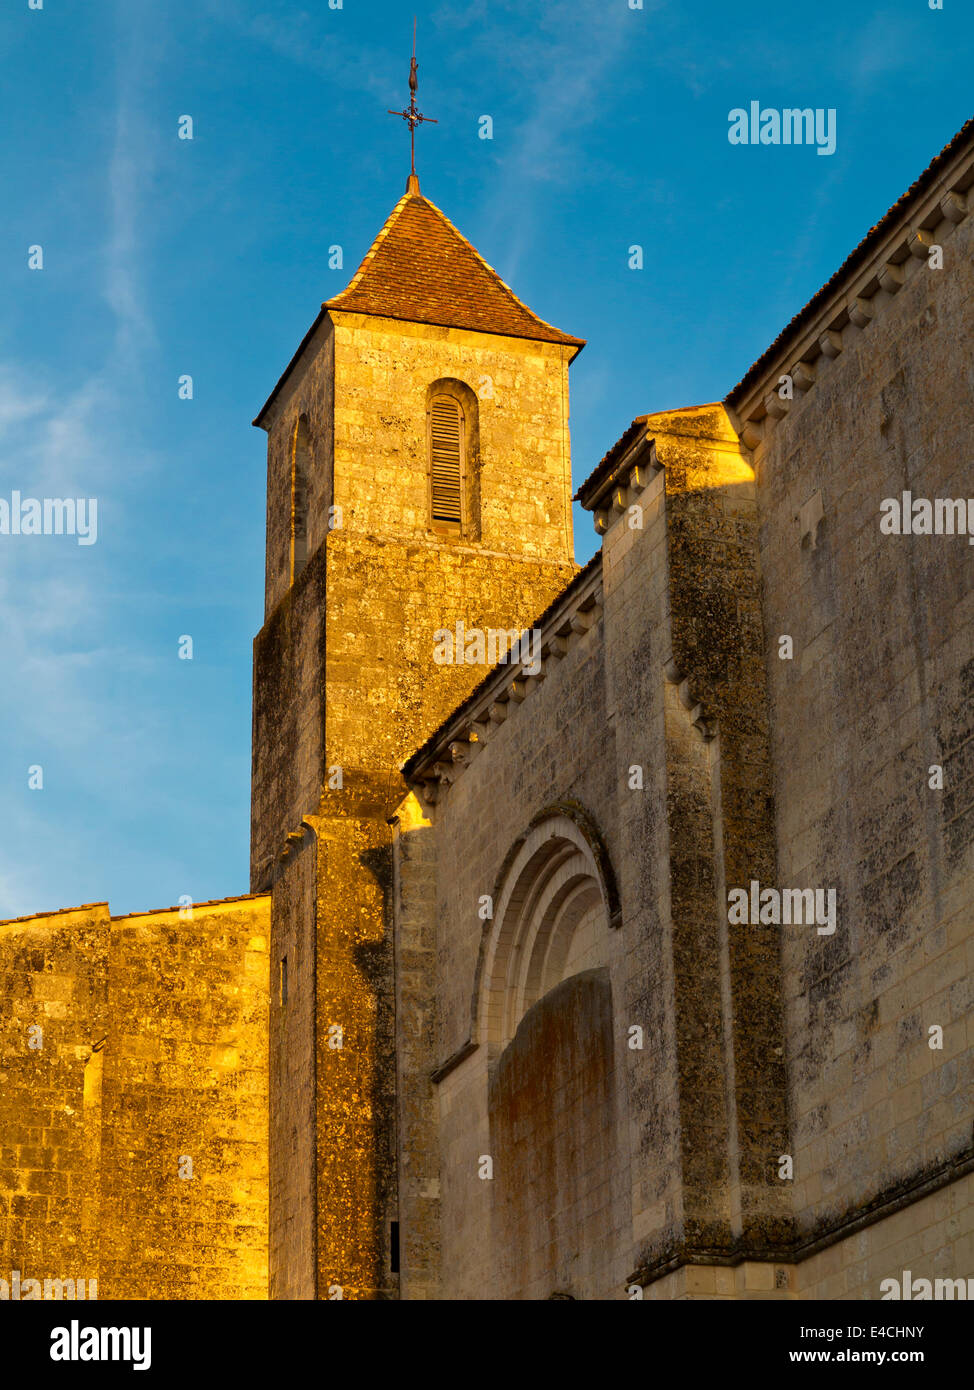 Church tower in Perignac a village in the Charente Maritime region of south western France Stock Photo